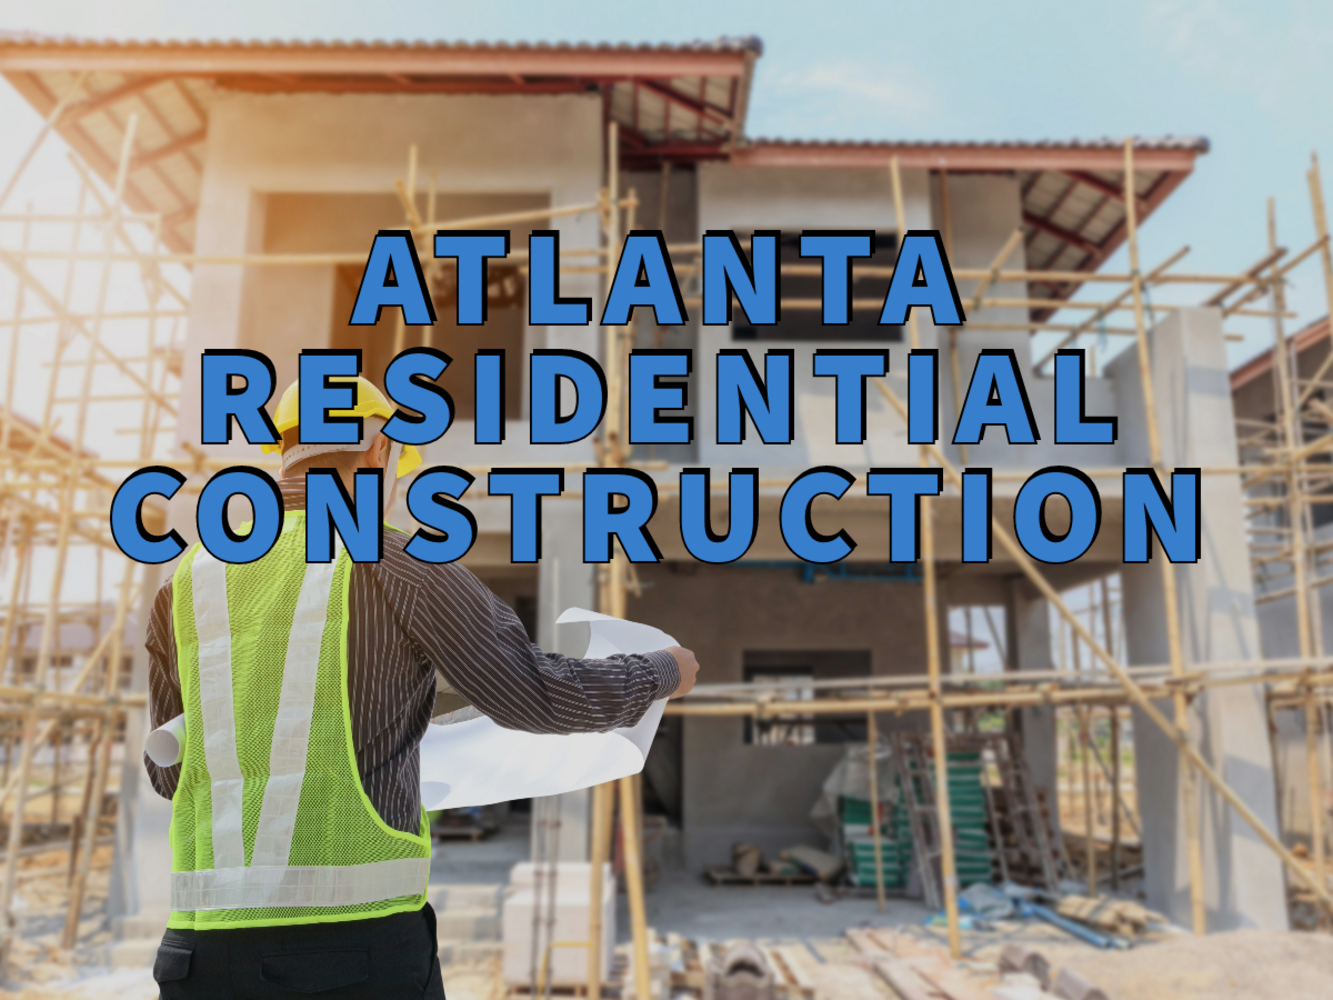 Atlanta residential construction written in blue over in-progress construction of home addition